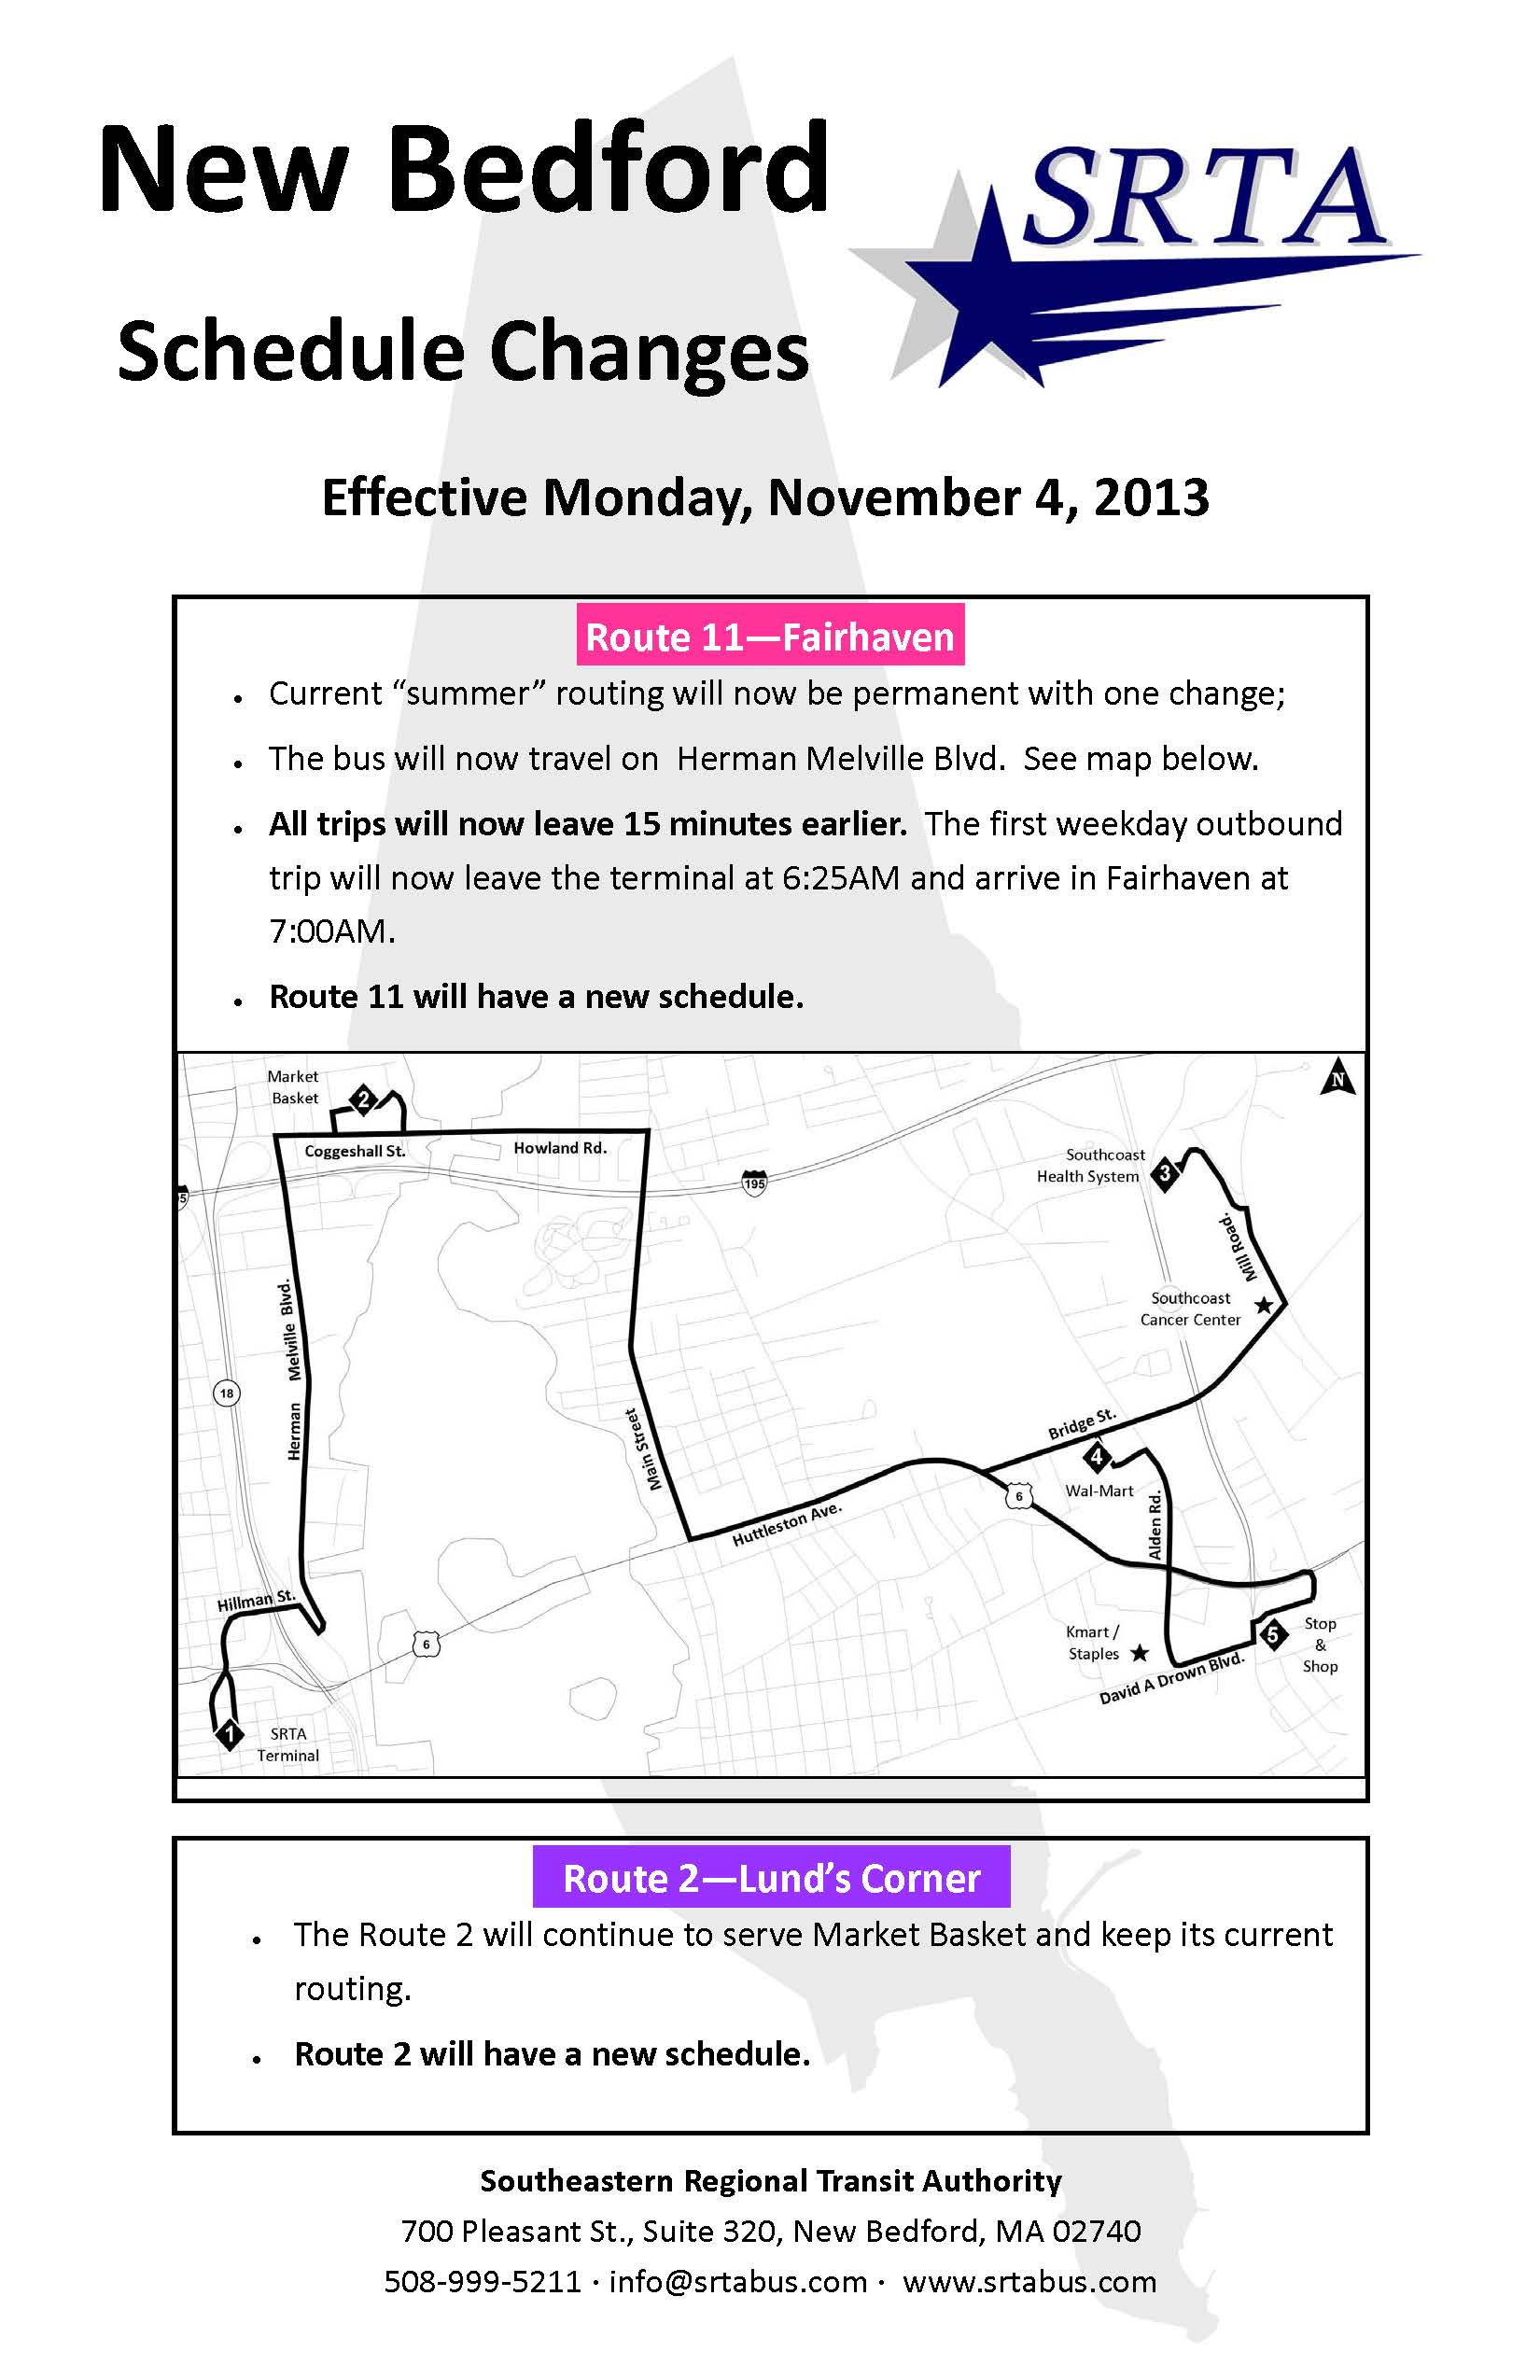 Nov 4 Schedule and Route Changes New Bedford